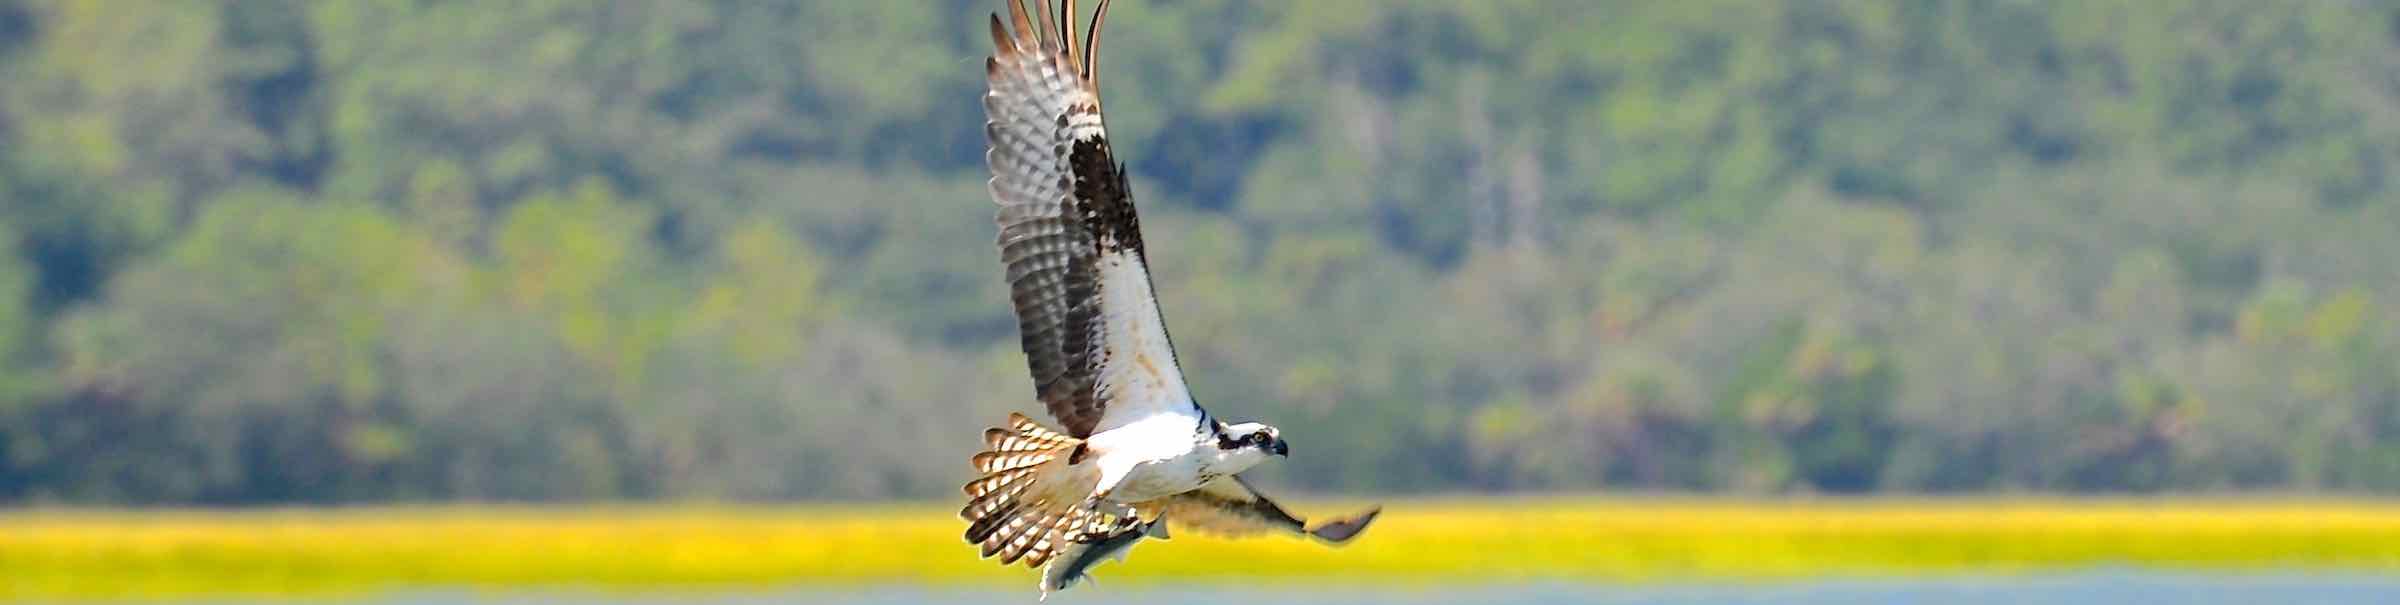 An osprey flying with a fish in its talons at Hilton Head Island, SC.